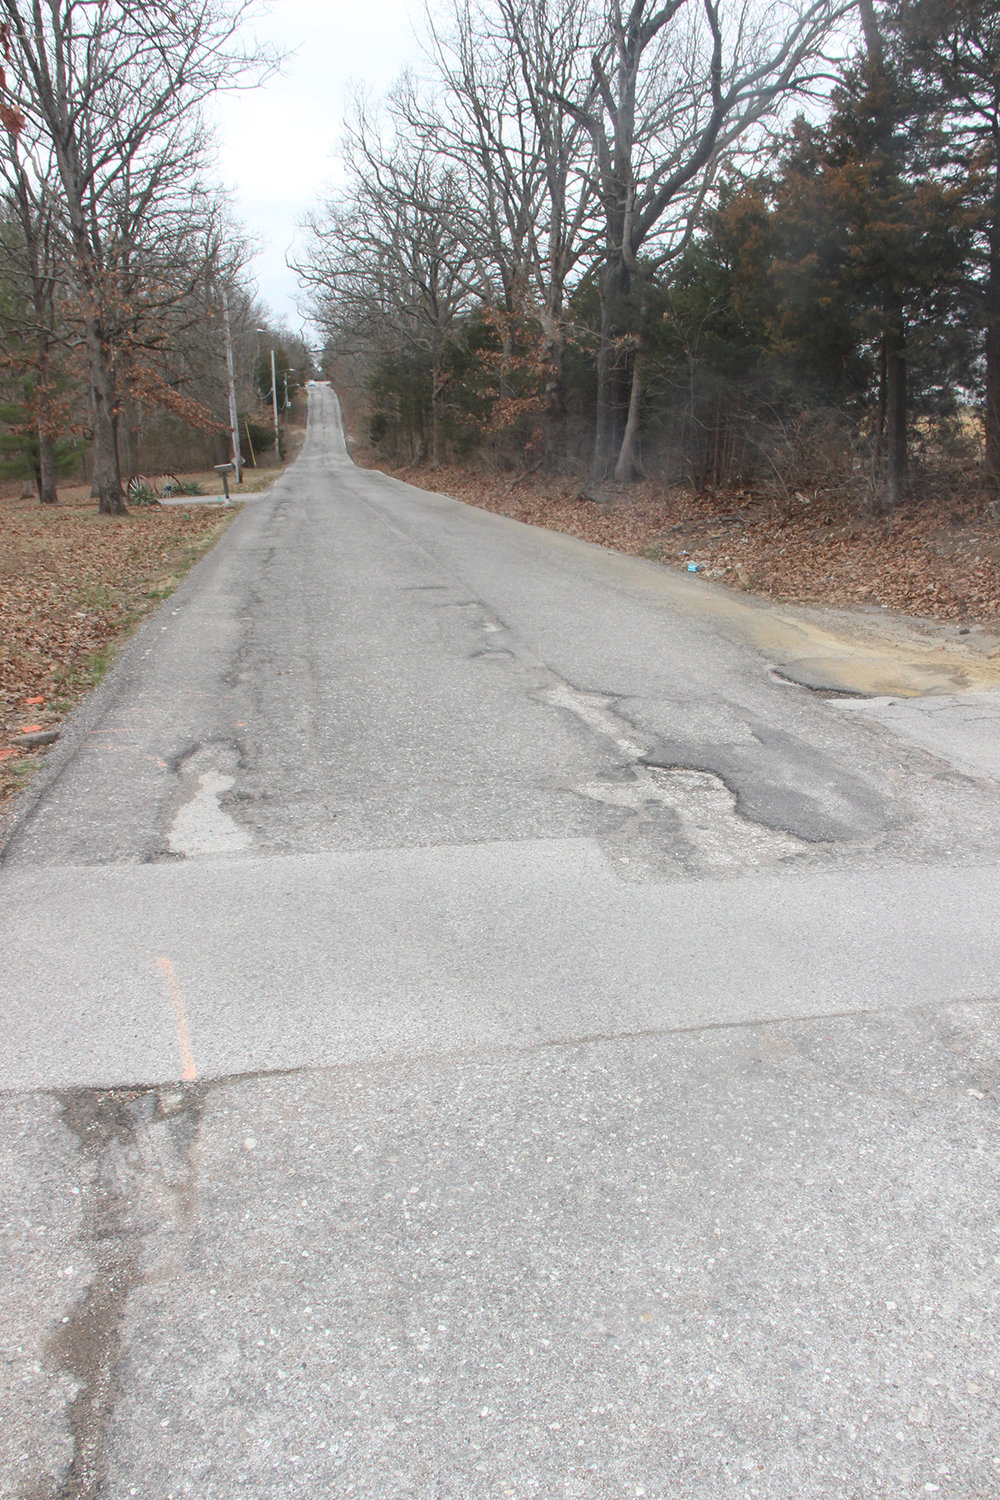 MESSY ROAD — Ruts and potholes all along Indian Head Lodge Road in Wright City are giving residents a rough ride and causing concerns that the road is going to completely fall apart. There is no active plan to fix the road because city and county governments have both denied owning the road.